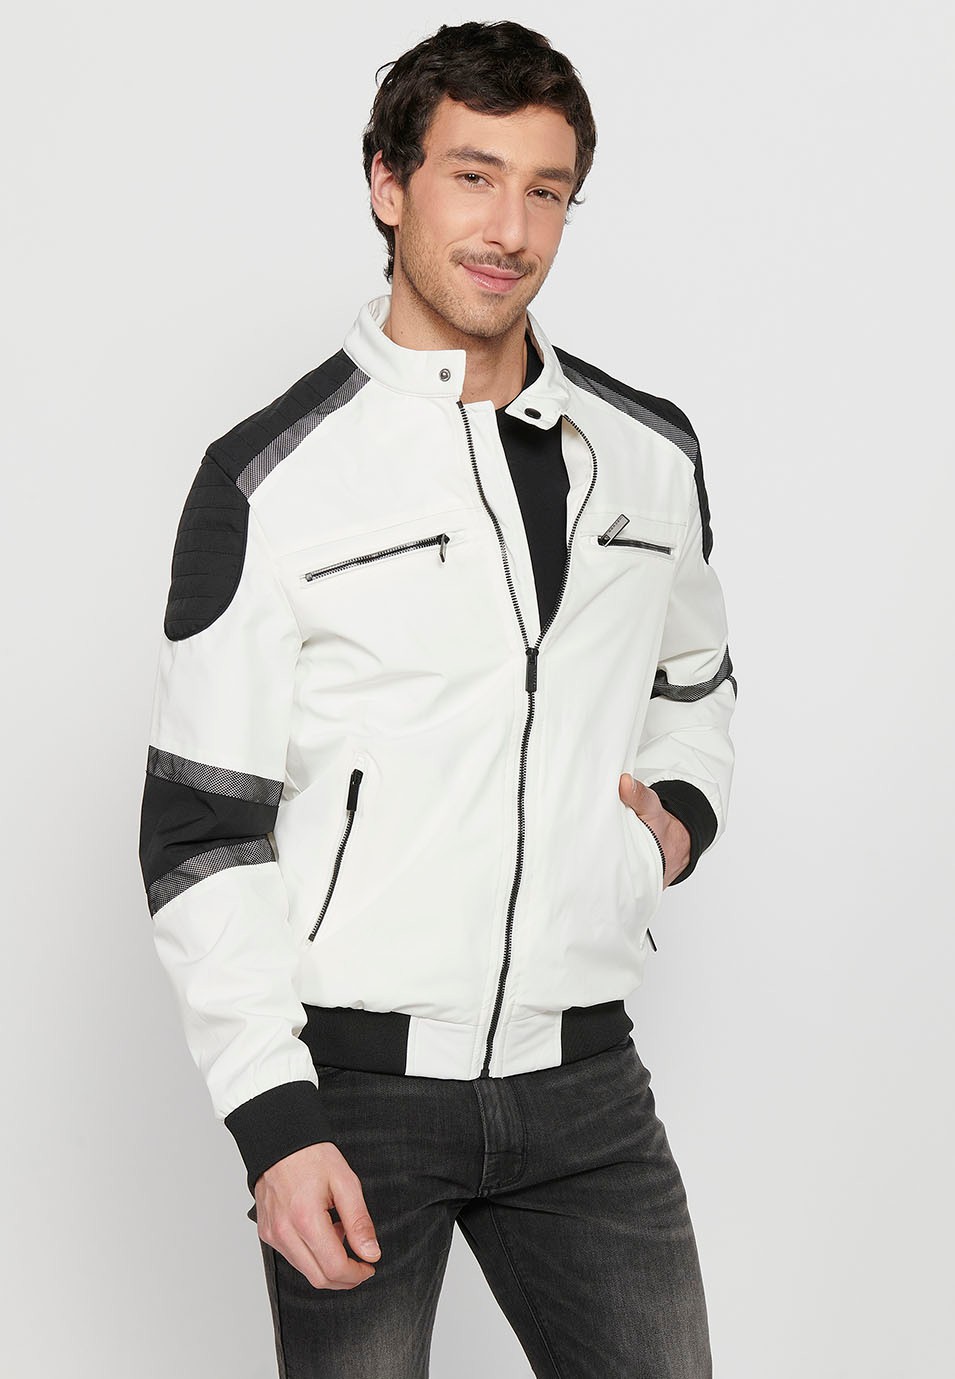 White Long Sleeve Jacket with High Round Neck, Pockets and Front Zipper Closure for Men